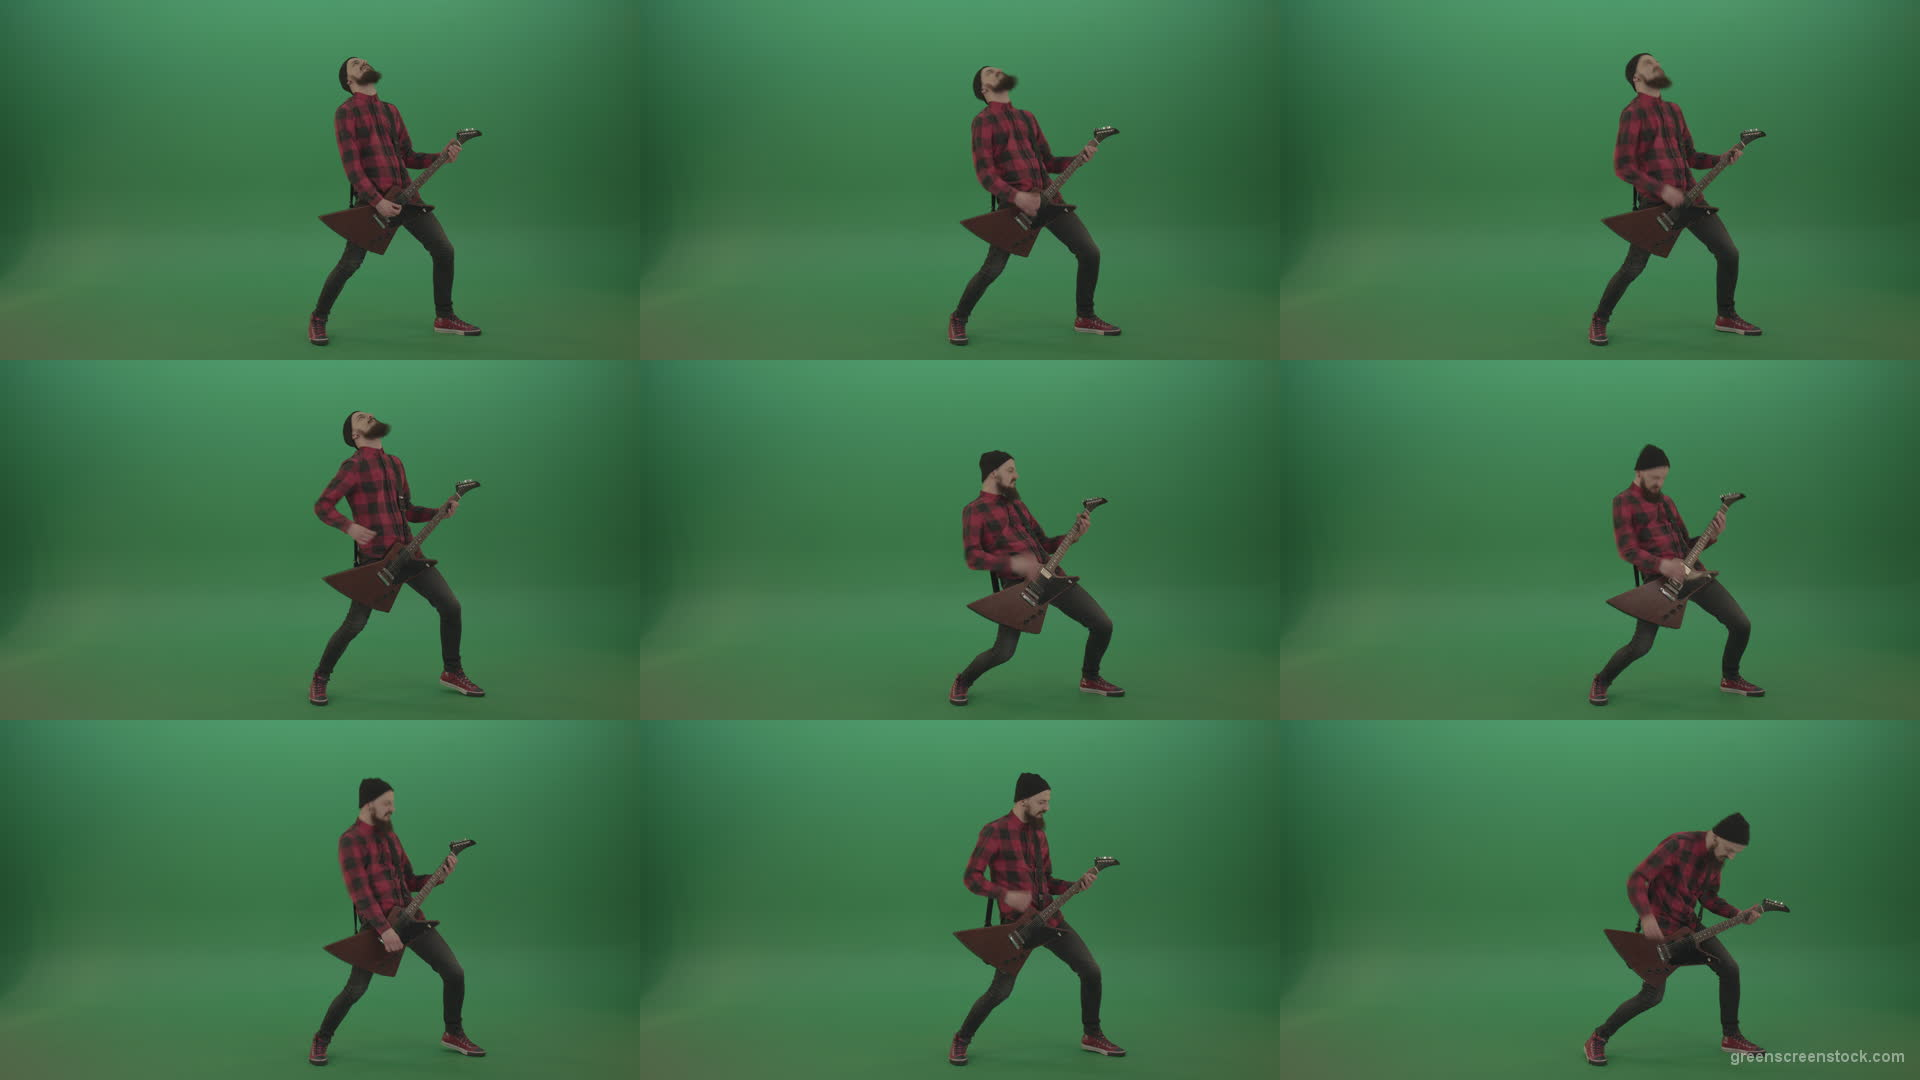 Punk-rock-full-size-man-guitarist-play-guitar-with-emotions-on-green-screen Green Screen Stock